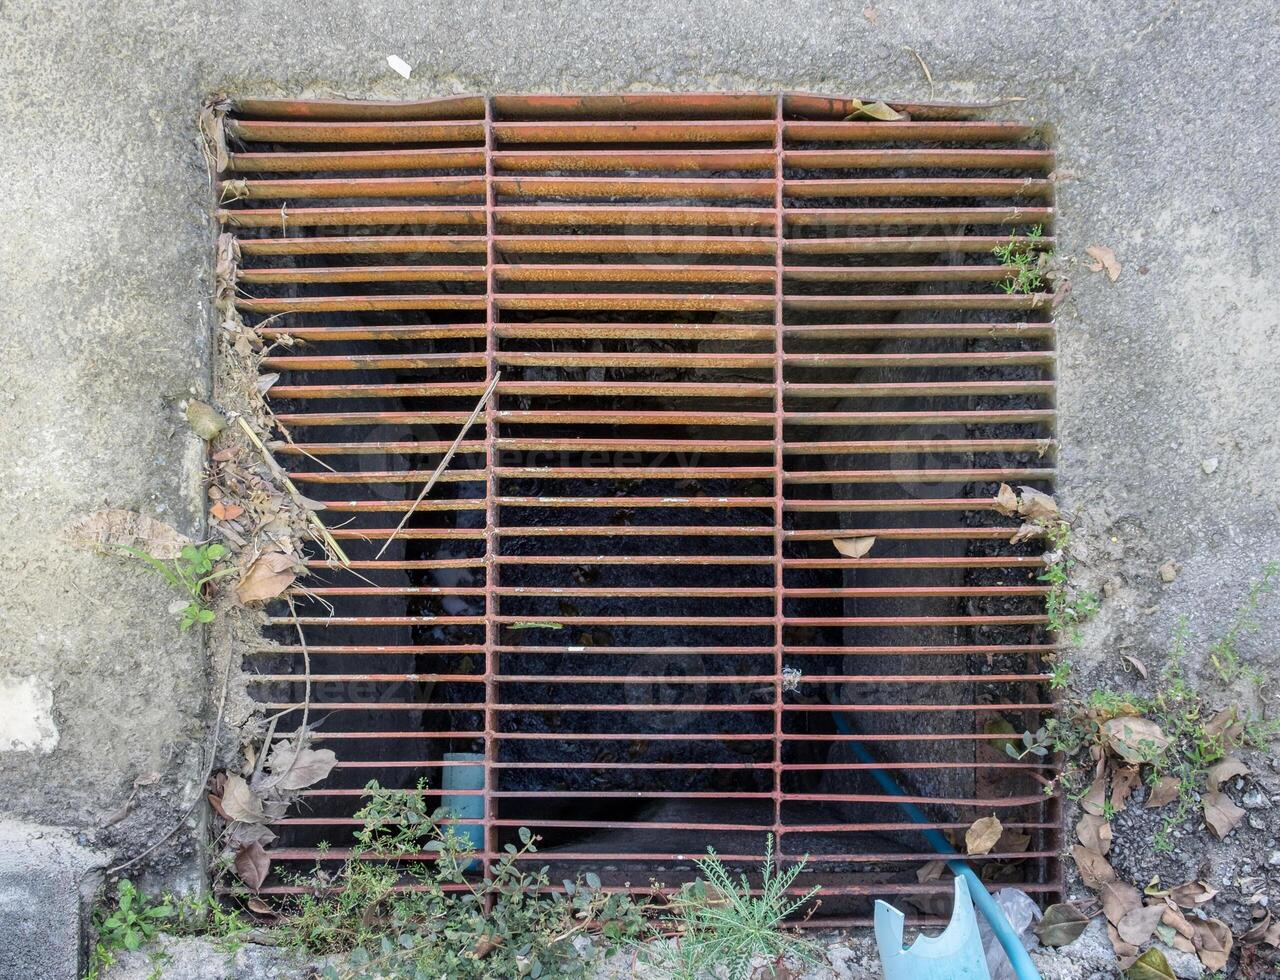 Steel grid rust cover in drain photo